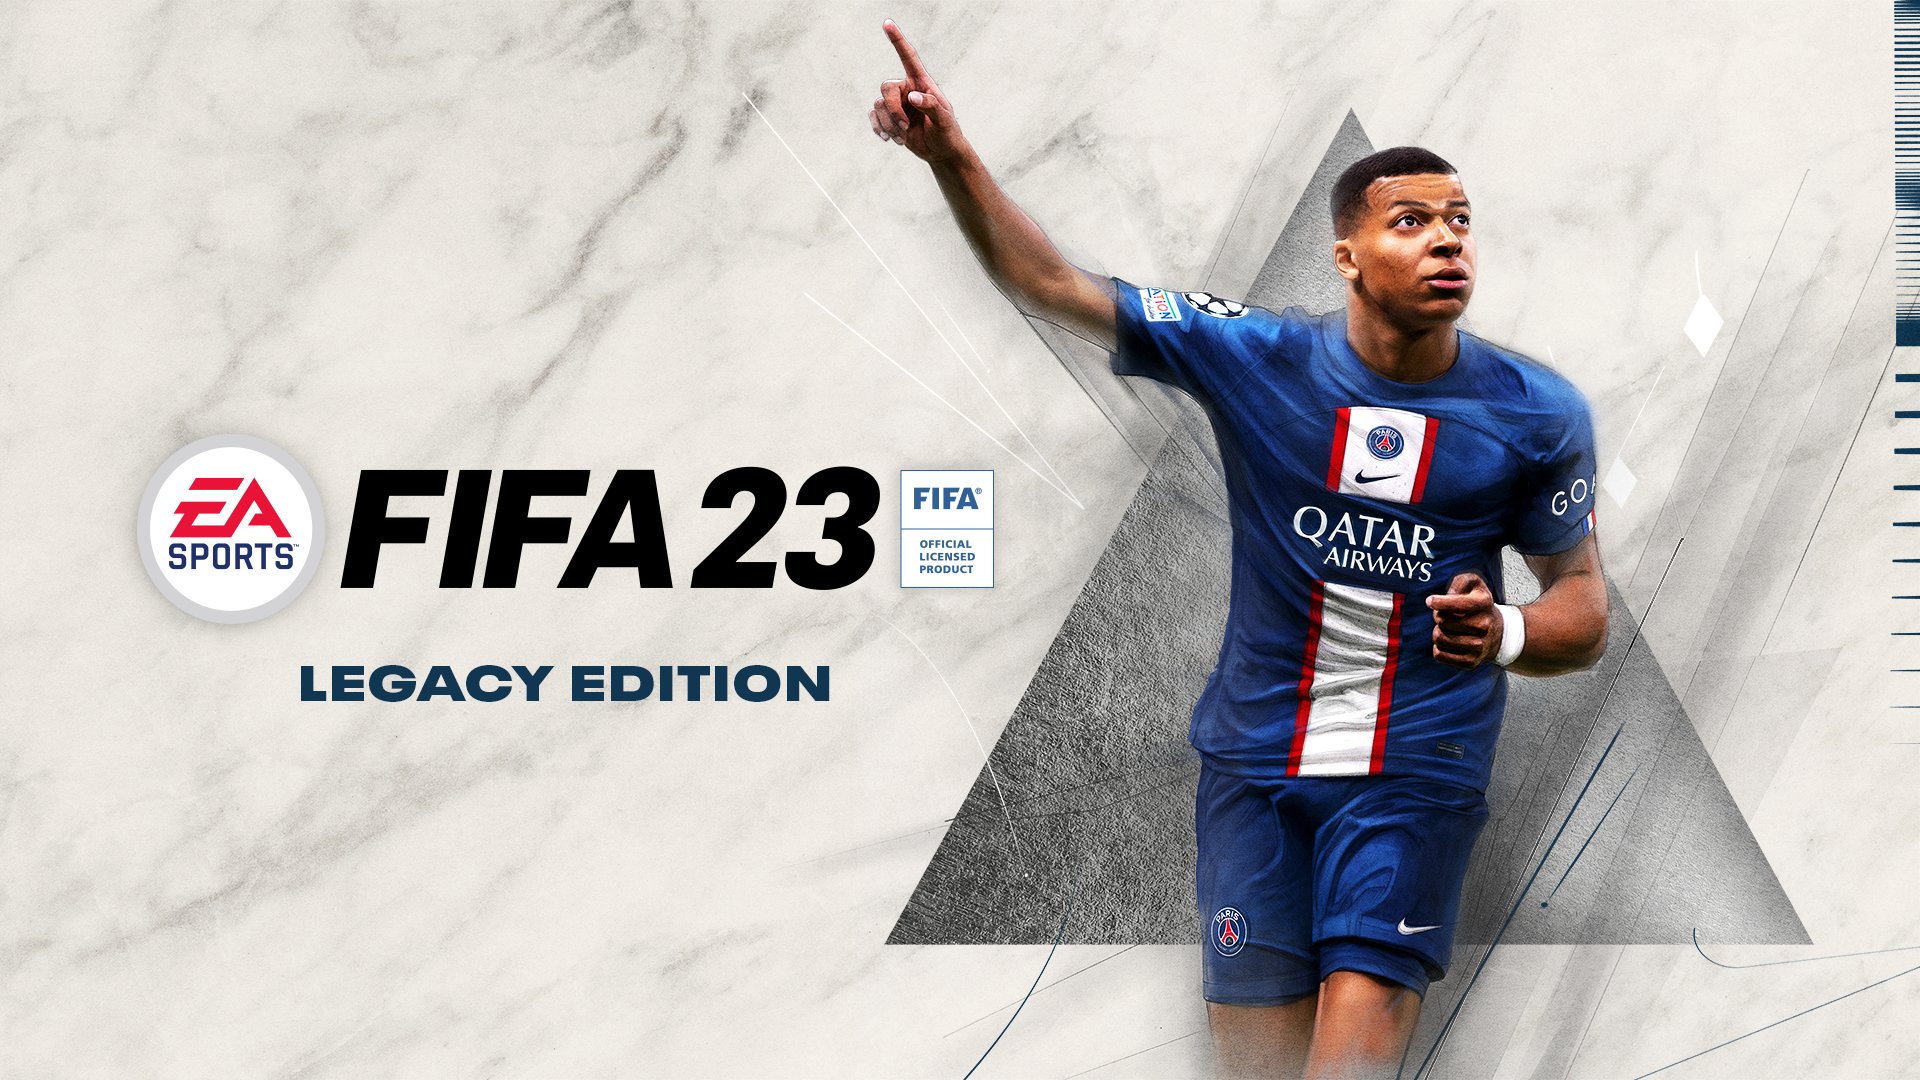 FIFA 23 coming to Switch in September, but again it's the Legacy Edition Nintendo News